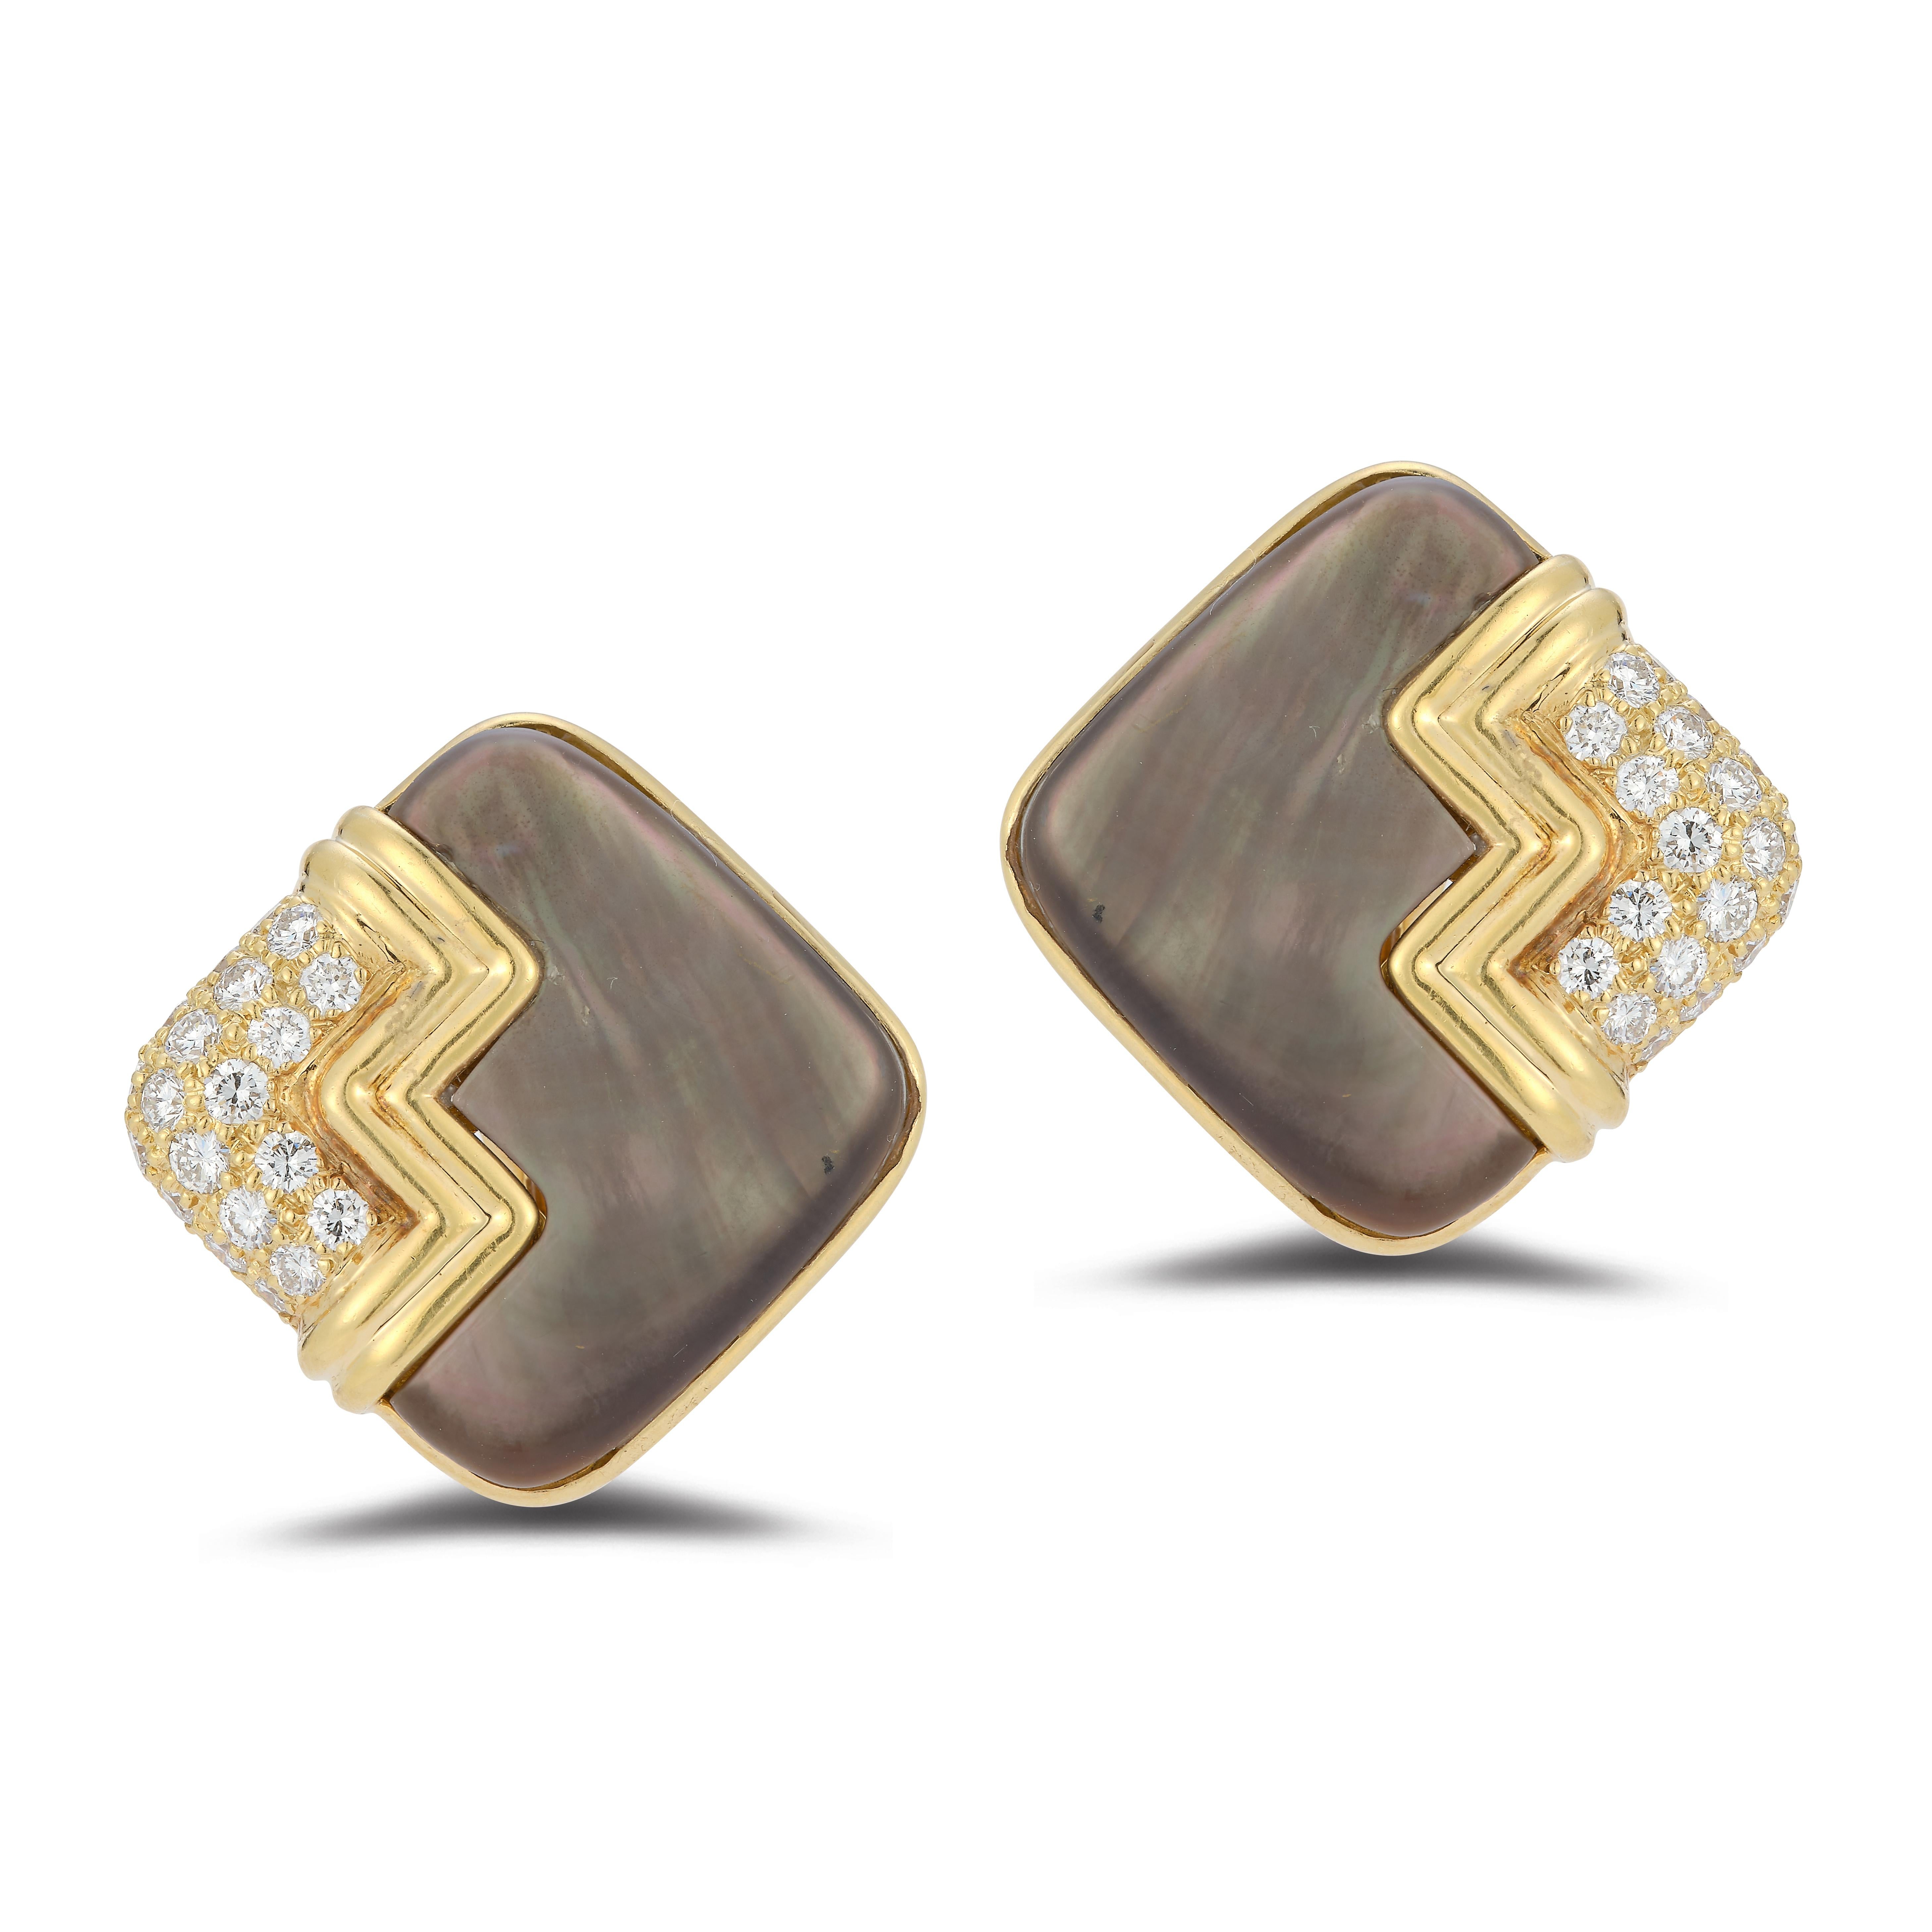 Mother of Pearl & Diamond Square Earrings

18k gold square clip on with a post earrings each set with black mother of pearl and 20 round diamonds.

Measurements: 1